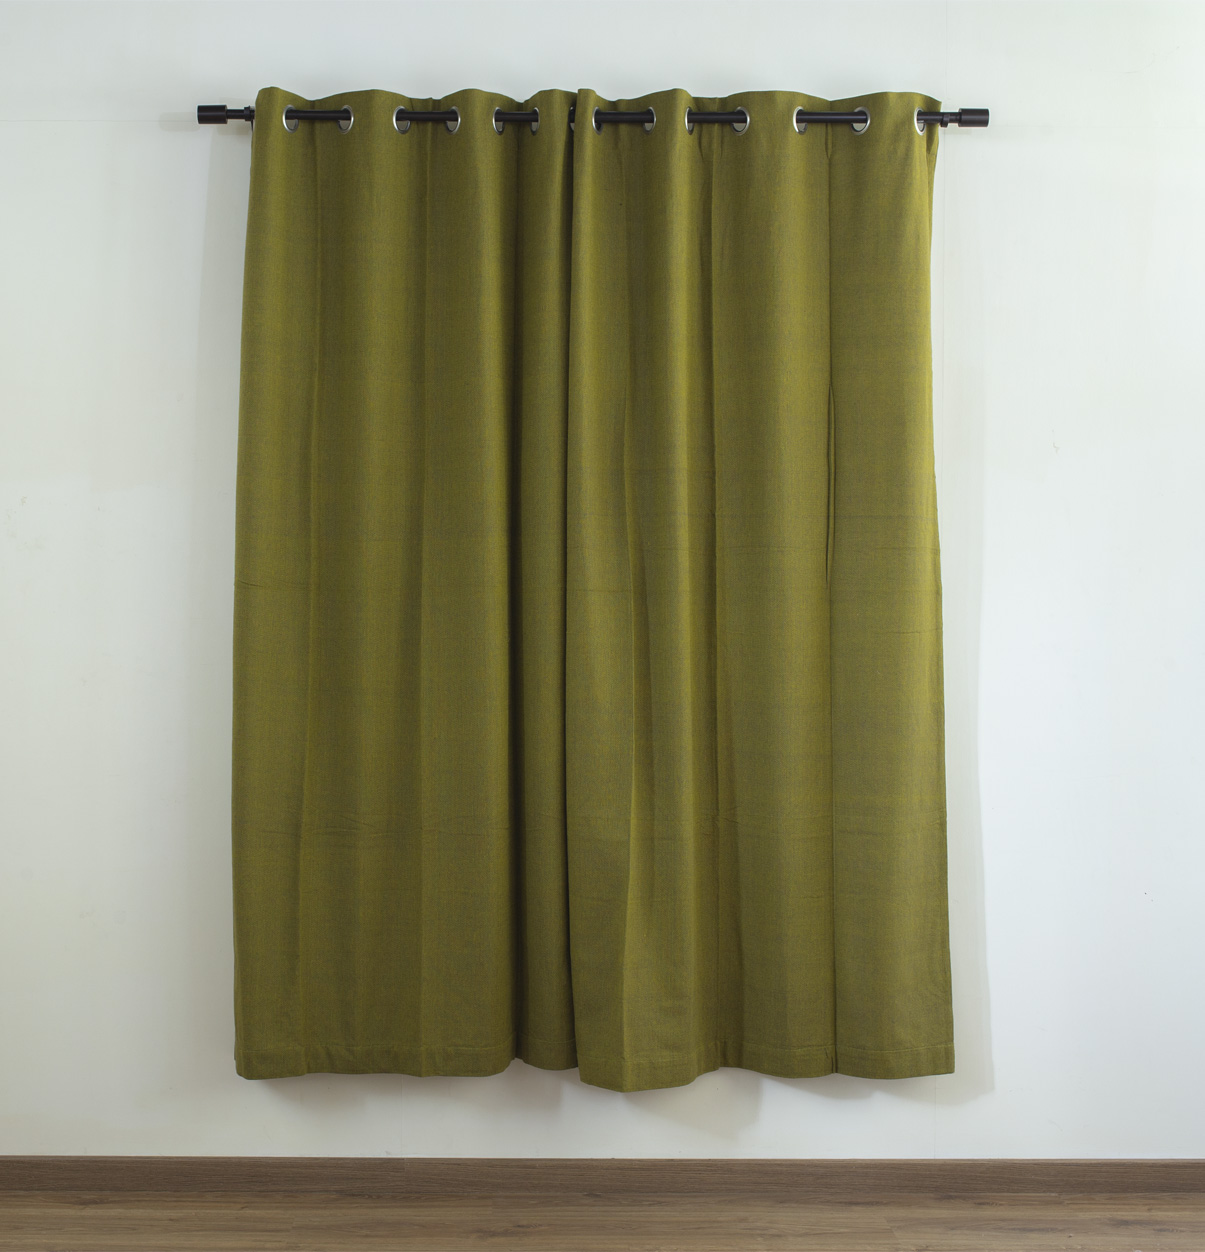 Customizable Curtain, Chambray Cotton – Olive Green